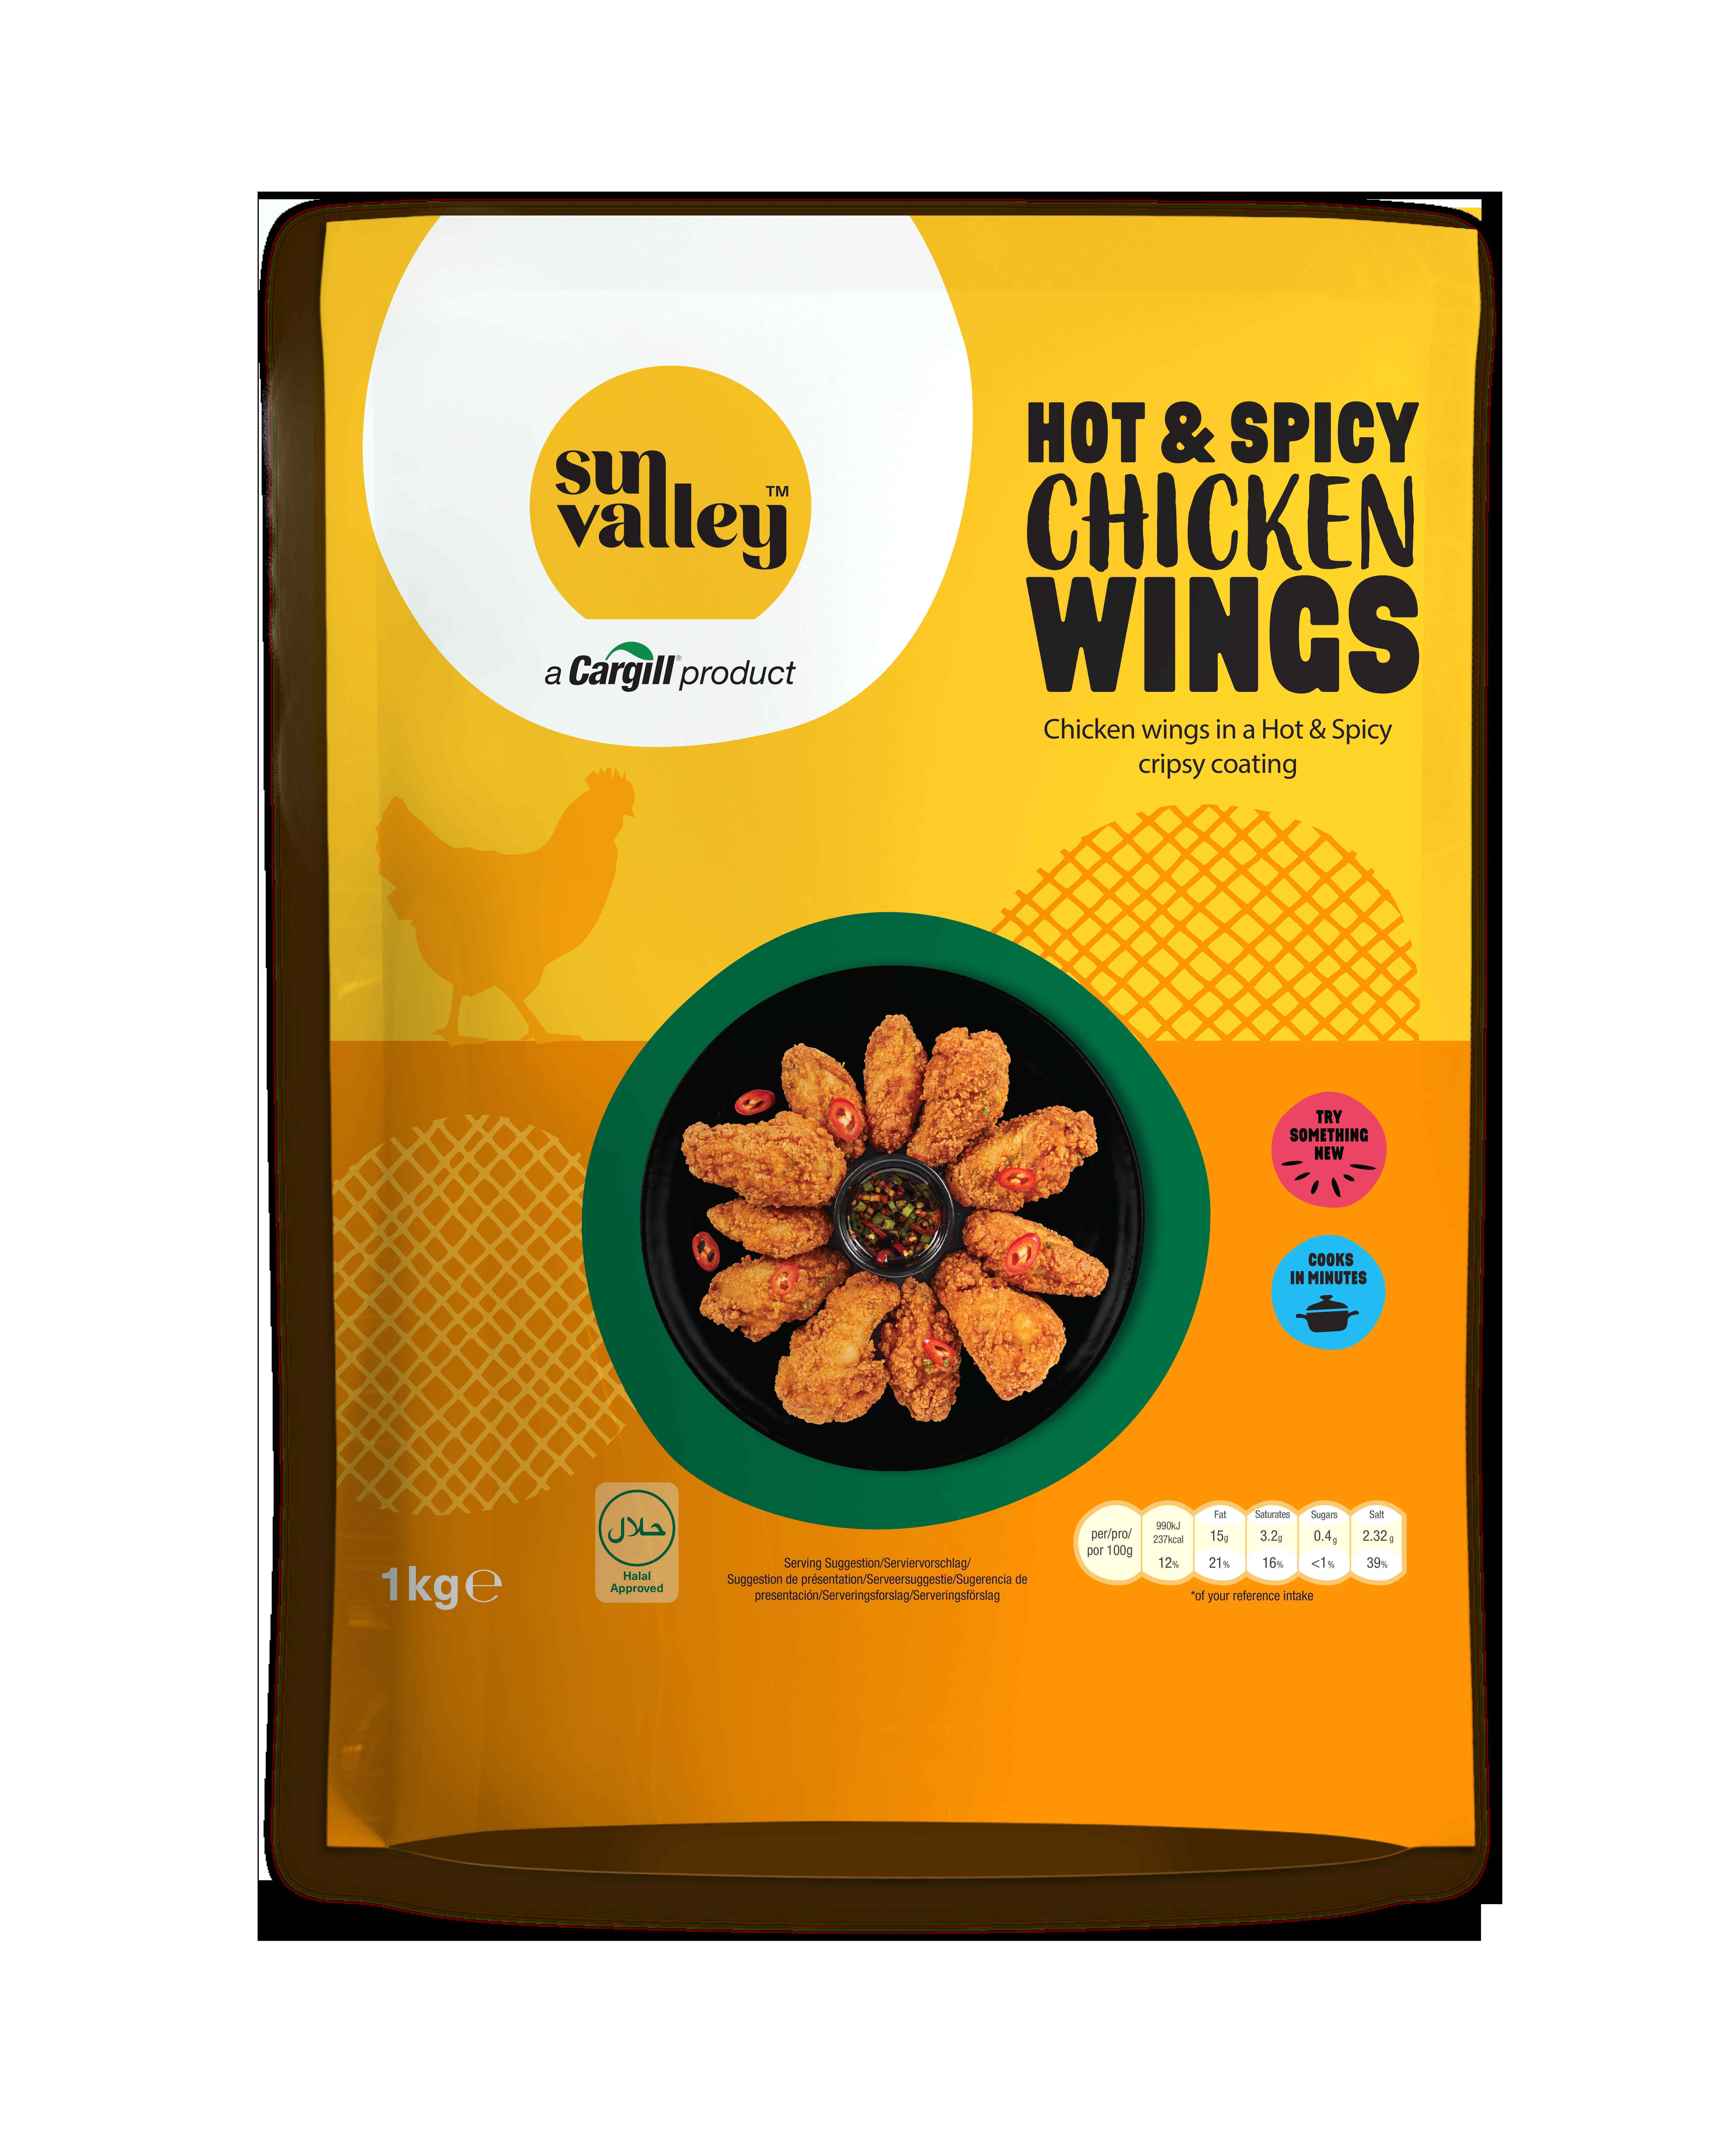 SunValley Hot & Spicy Chicken Wings (1kg)